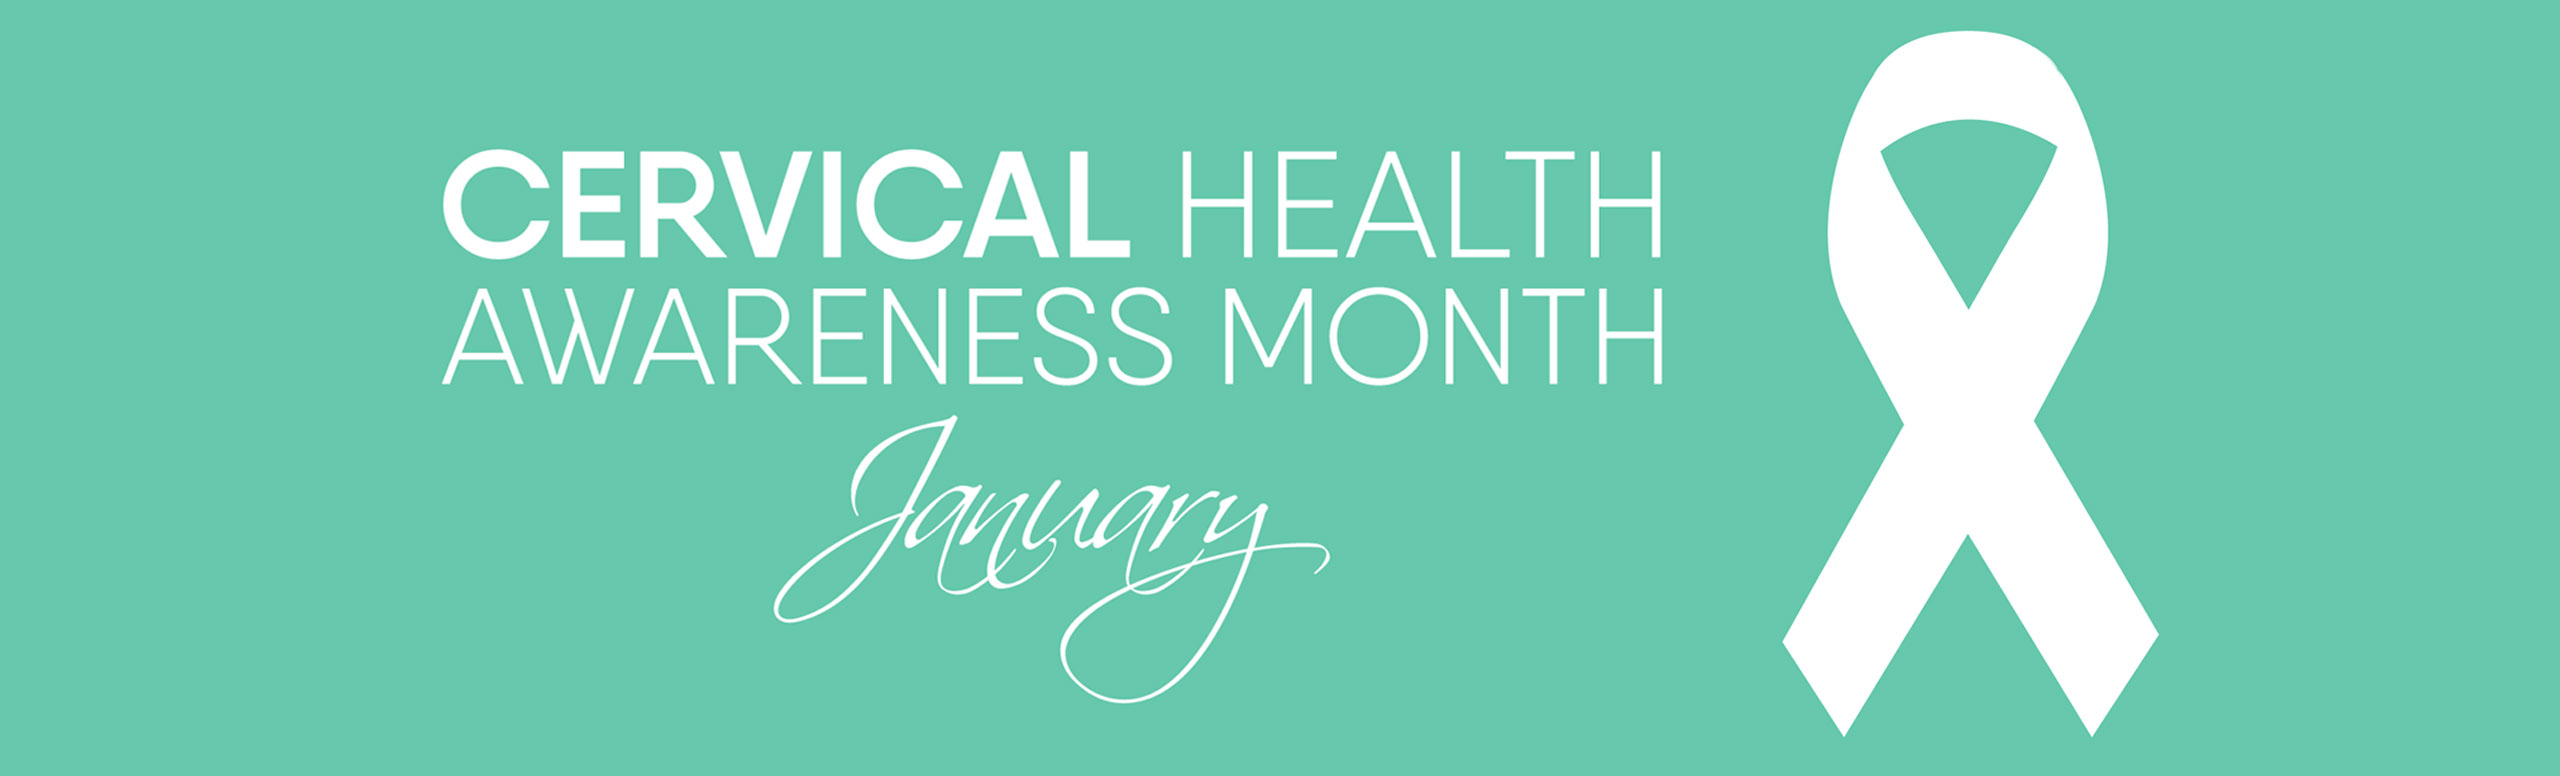 Cervical Health Awareness Month
January